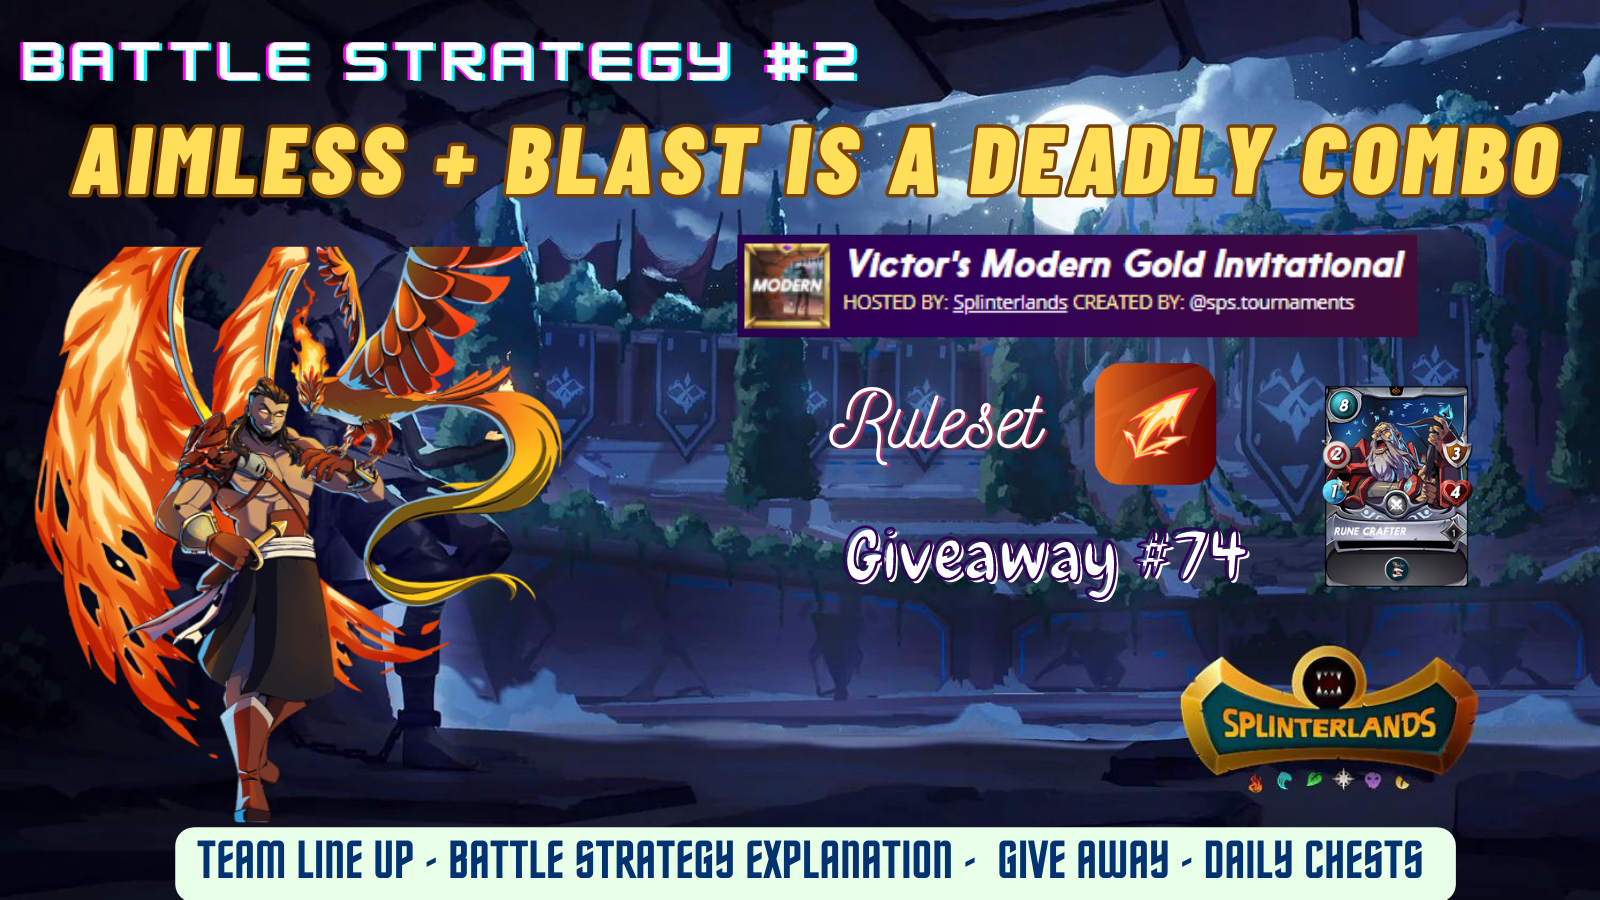 @queen-silvia/battle-strategy-2--aimless--blast-is-a-deadly-combo-giveaway-74-rune-crafter